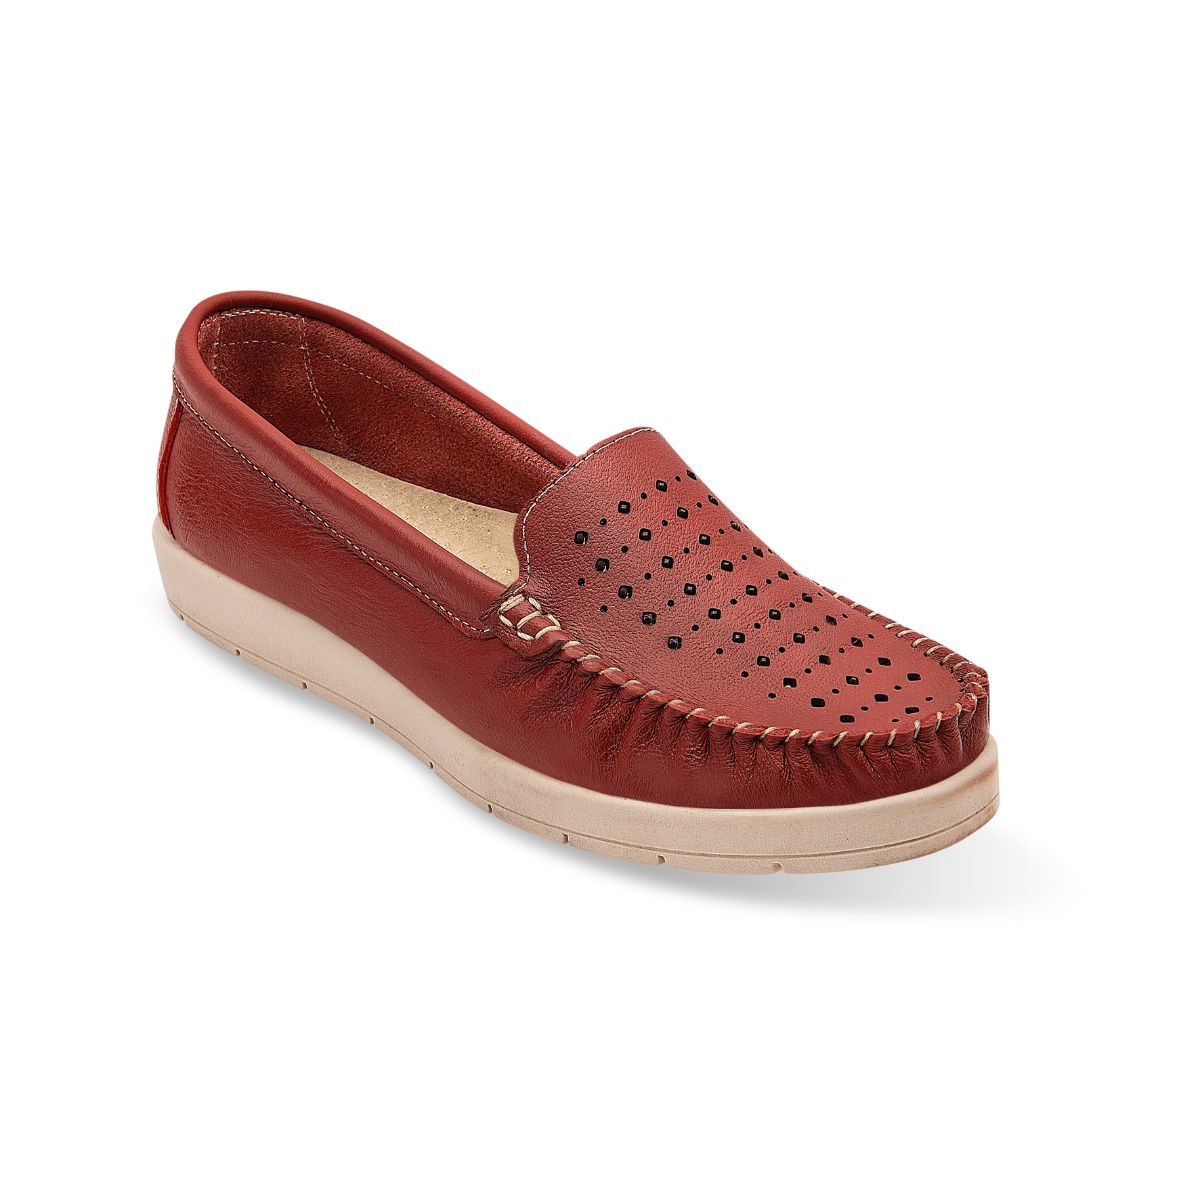 DESCANSO CASUAL MUJER LUBERT 108 ROJO